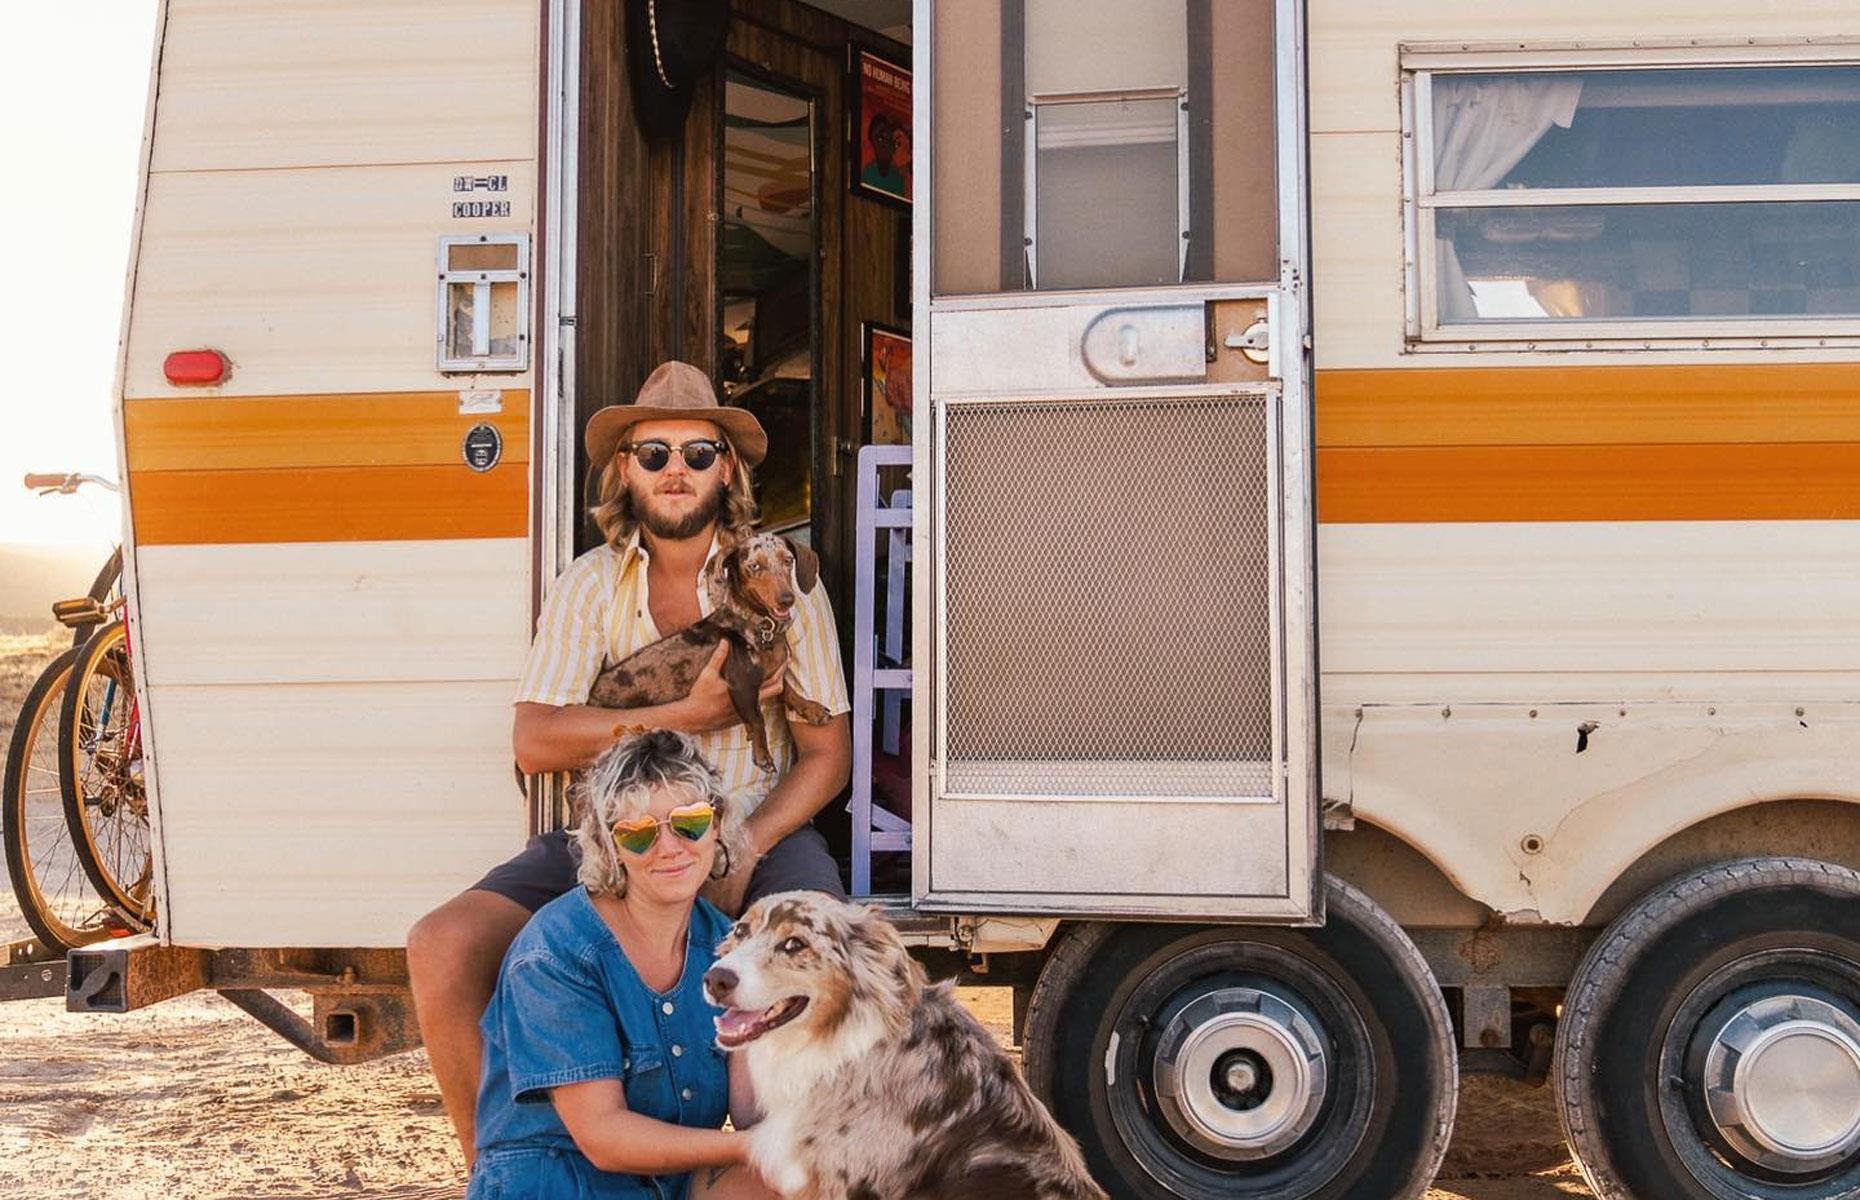 <p>Ariane Walder and her partner Zach live in a 152 square-foot (14sqm) 1976 campervan after needing to escape intense non-profit jobs and "the grind." They document their nomadic and bohemian lifestyle on their Instagram account <a href="https://www.instagram.com/with.love.and.dirt/?hl=en">@with.love.and.dirt</a>. The creative couple bought their 1970s van in 2021 and set to work renovating and injecting their own personalities into the small-but-mighty trailer. Their maiden voyage came eight months later, which unexpectedly took them to Las Vegas. </p>  <p><strong>Liking this? Click on the Follow button above for more great stories from loveEXPLORING</strong></p>